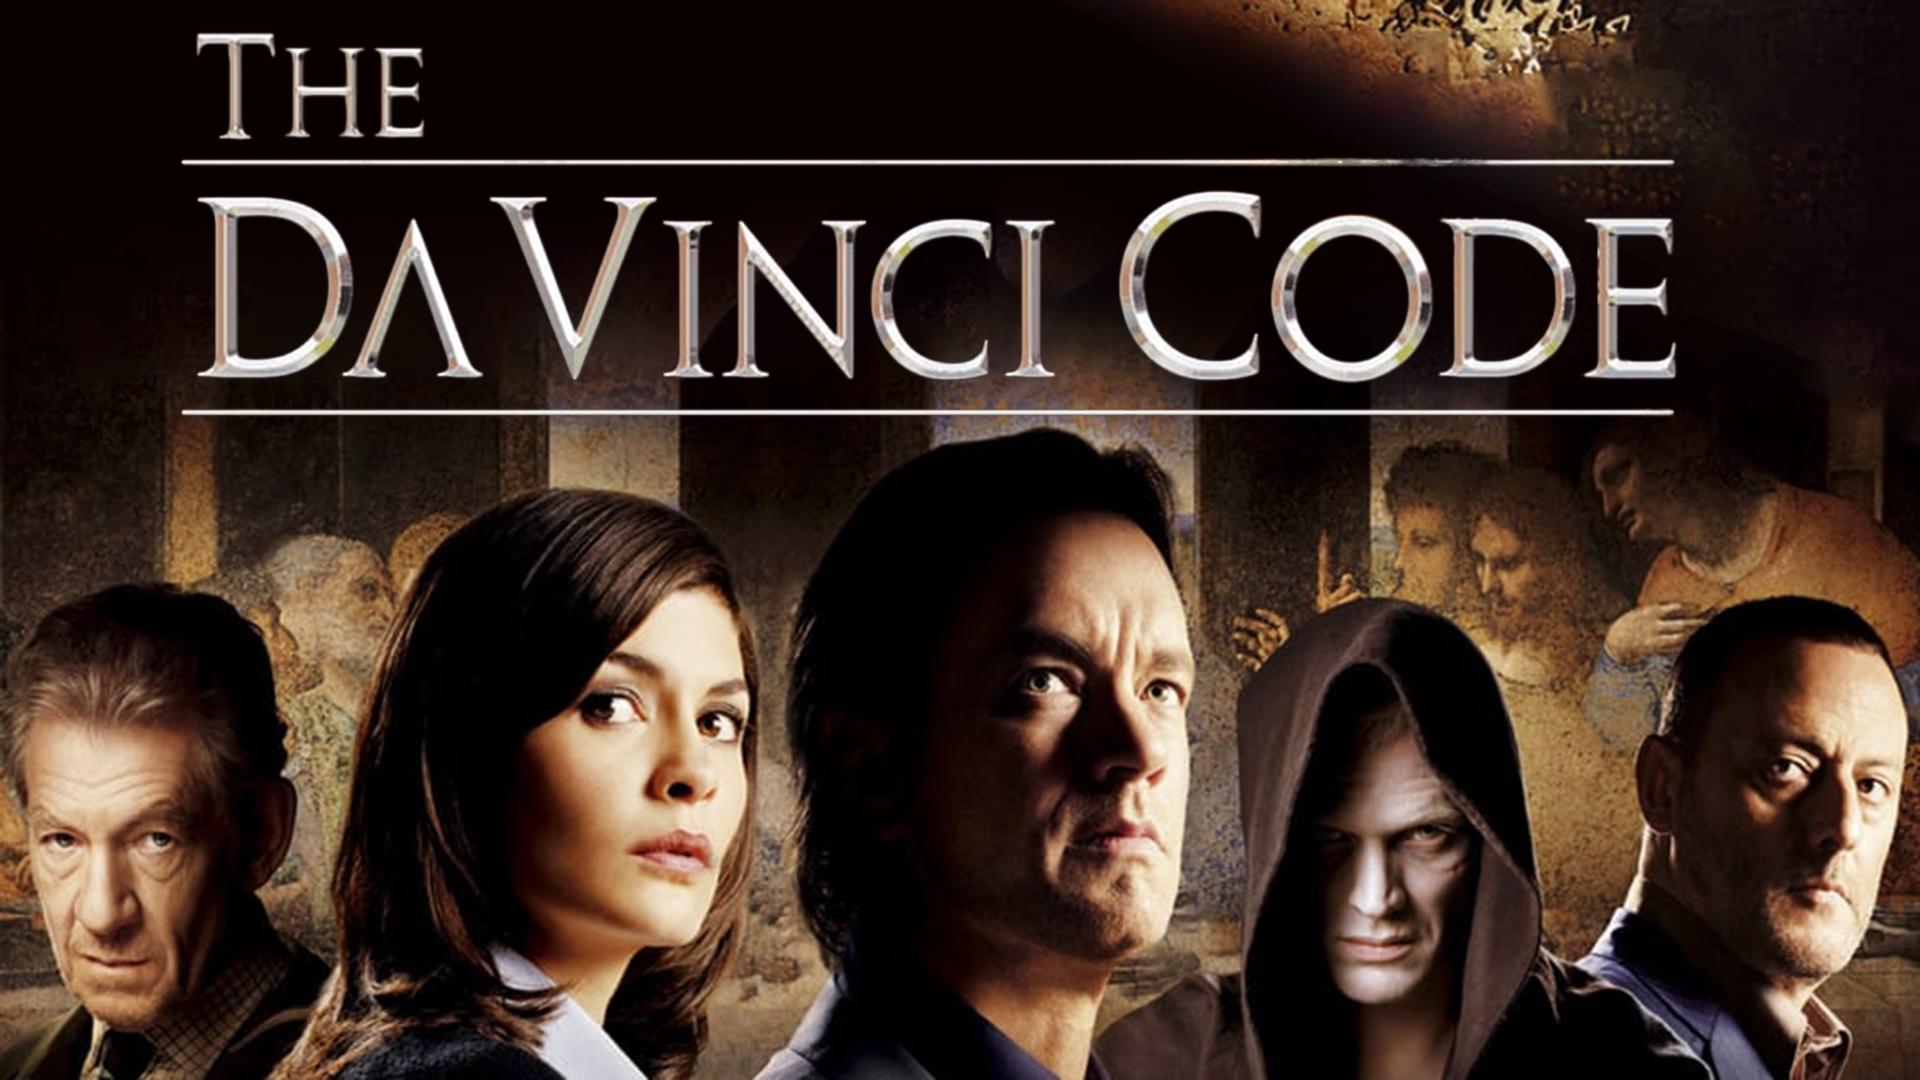 Watch The Da Vinci Code Streaming Online on Philo (Free Trial)